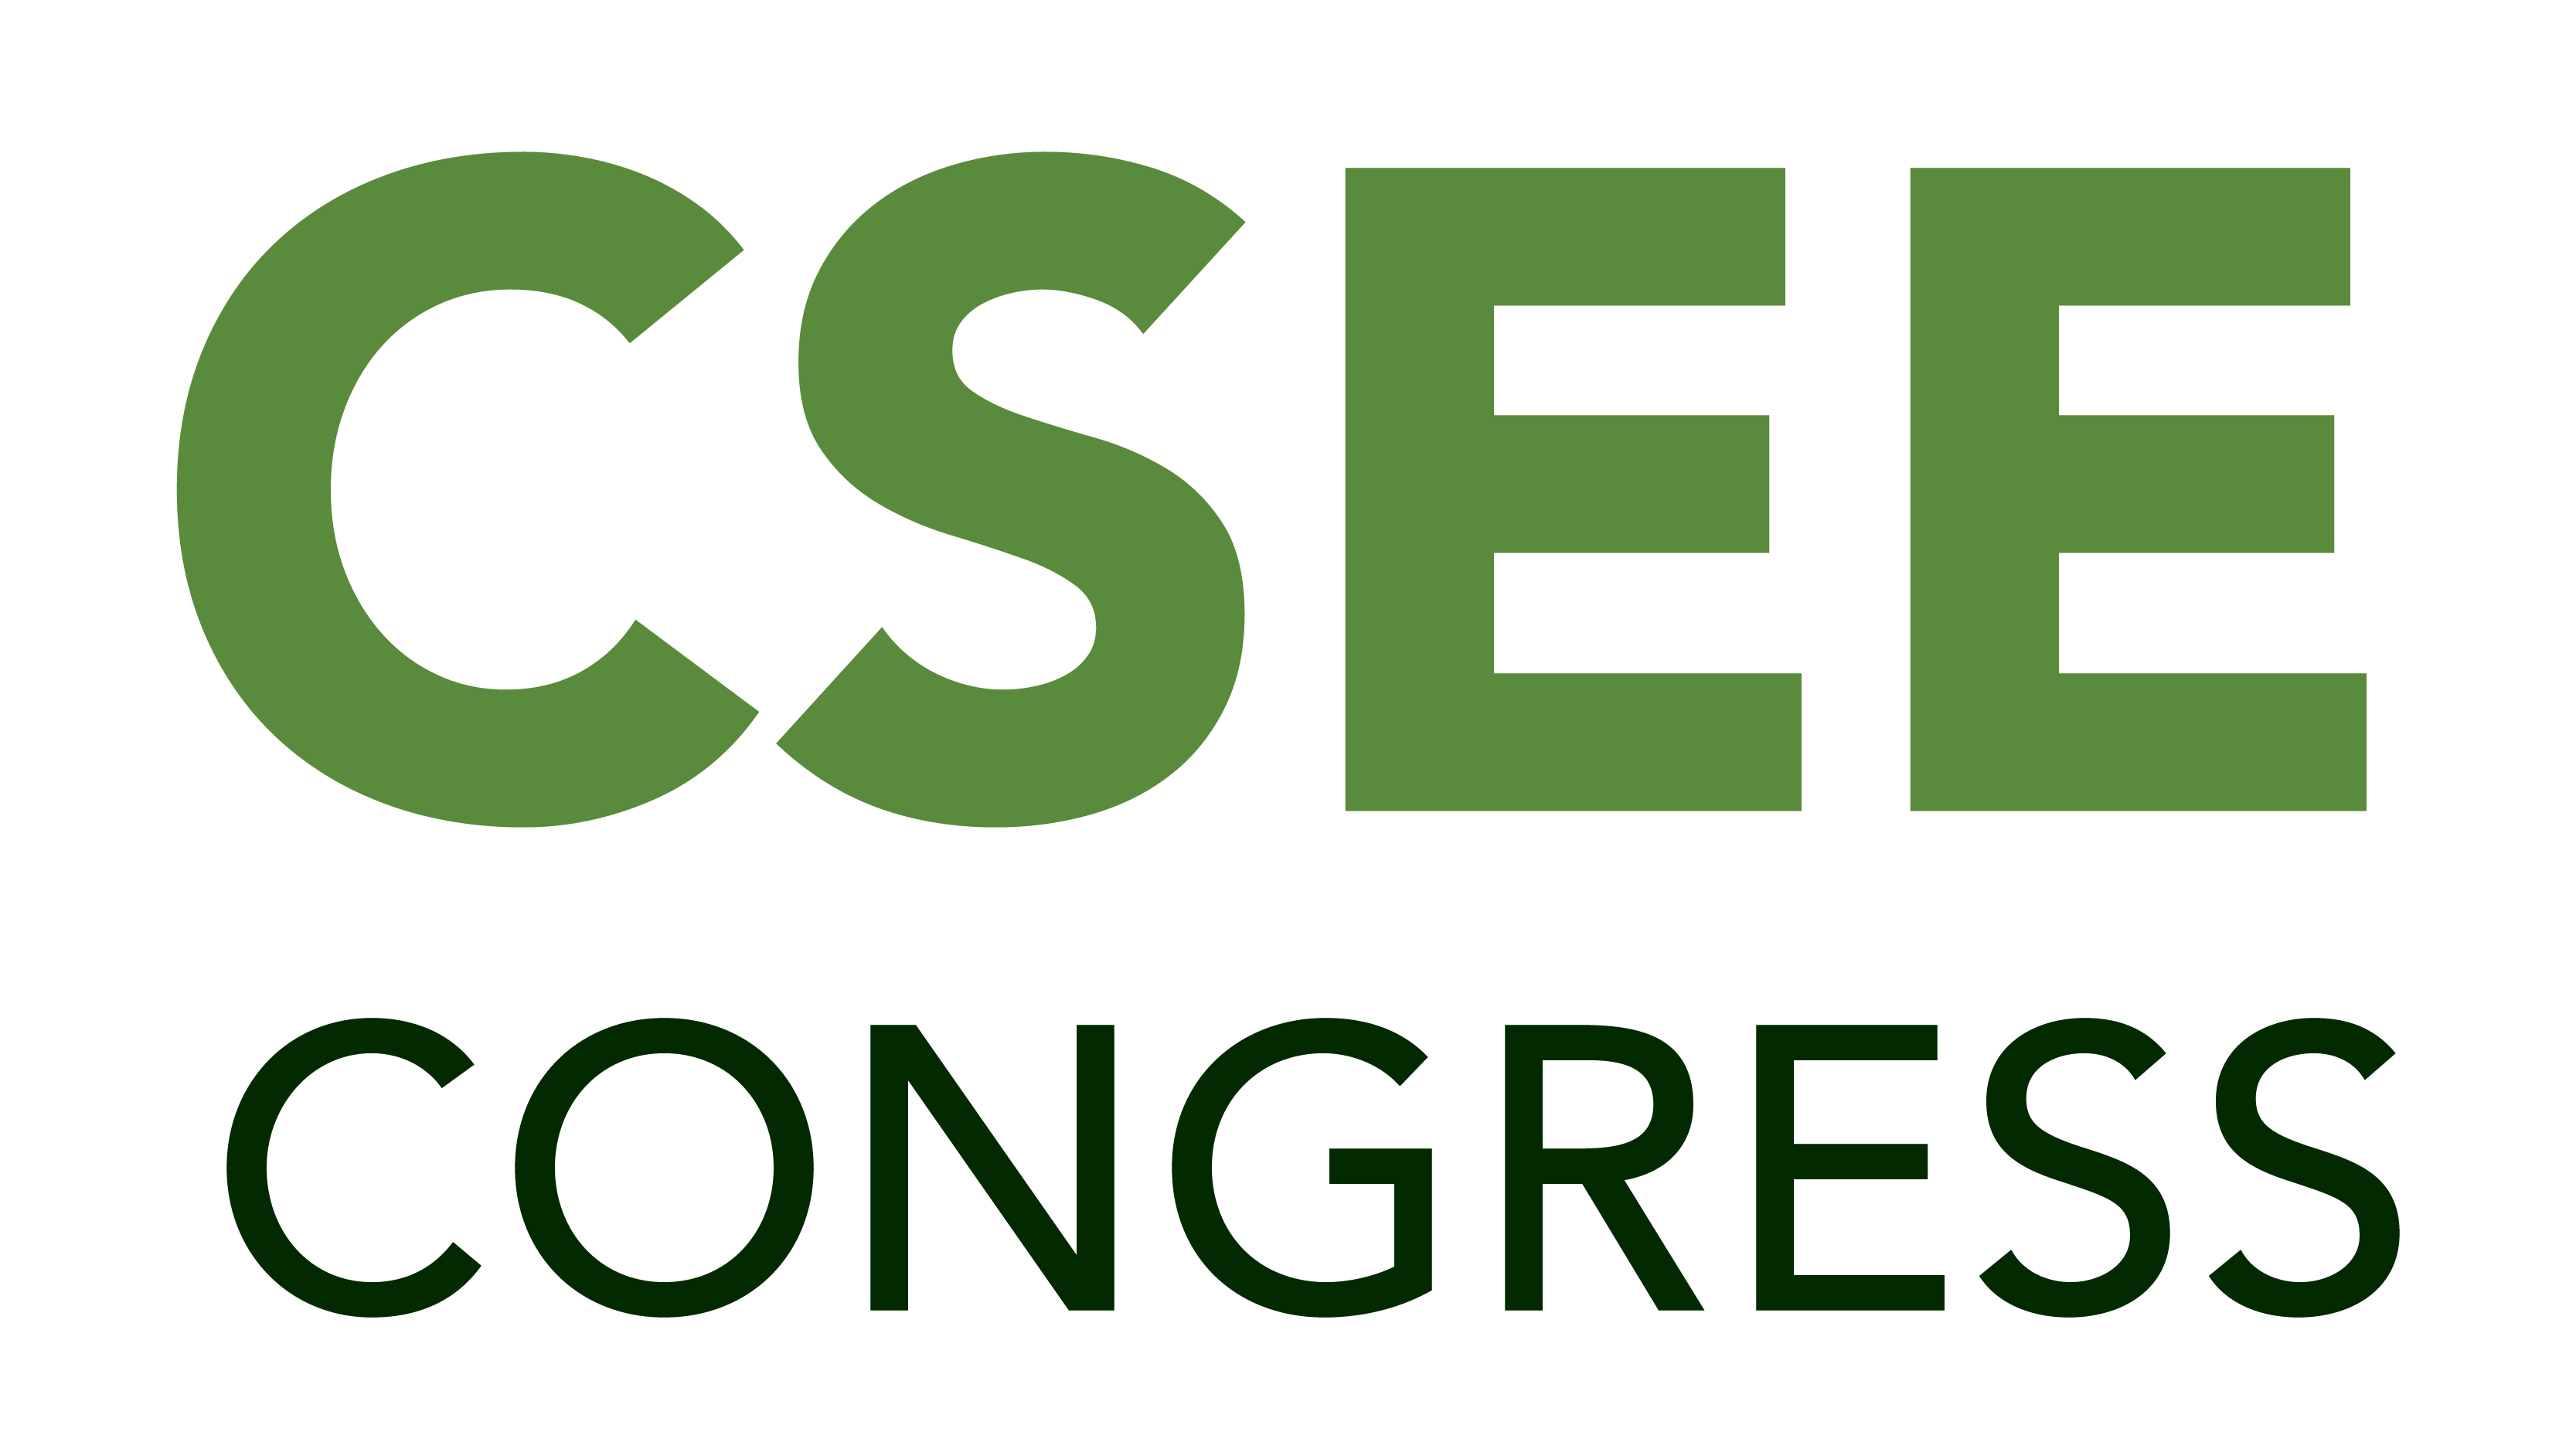 8th World Congress on Civil, Structural, and Environmental Engineering, March, 2025